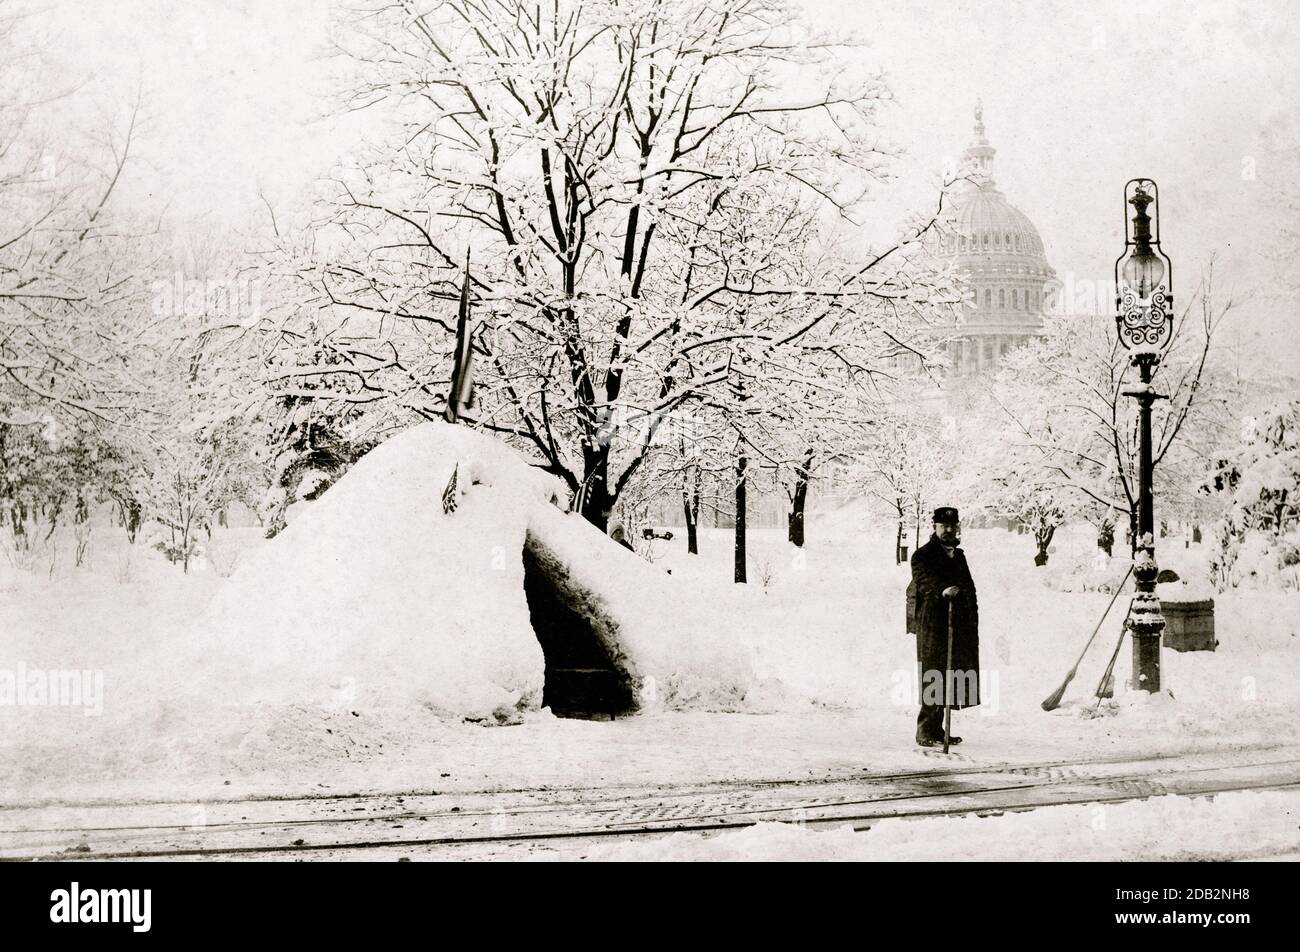 Man standing by snow hut, after blizzard of 1888, with U.S. Capitol in background, Washington, D.C.. Stock Photo